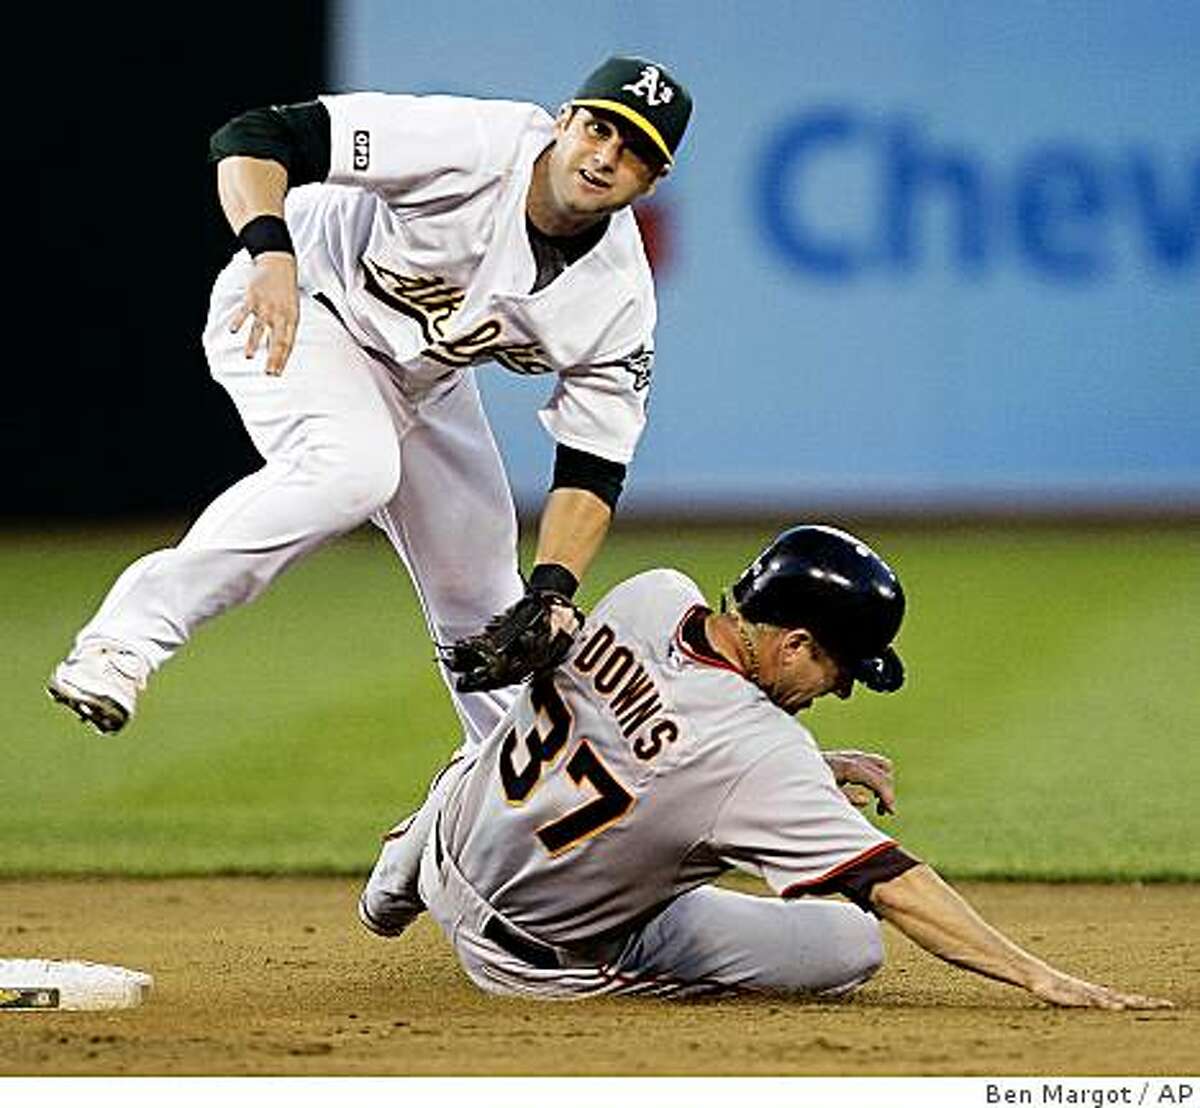 Oakland Athletics second baseman Adam Kennedy hops over San Francisco Giants' Matt Downs (37) after completing a double play in the fifth inning of a baseball game Monday, June 22, 2009, in Oakland, Calif. Giants' Aaron Rowand was out at first base. (AP Photo/Ben Margot)